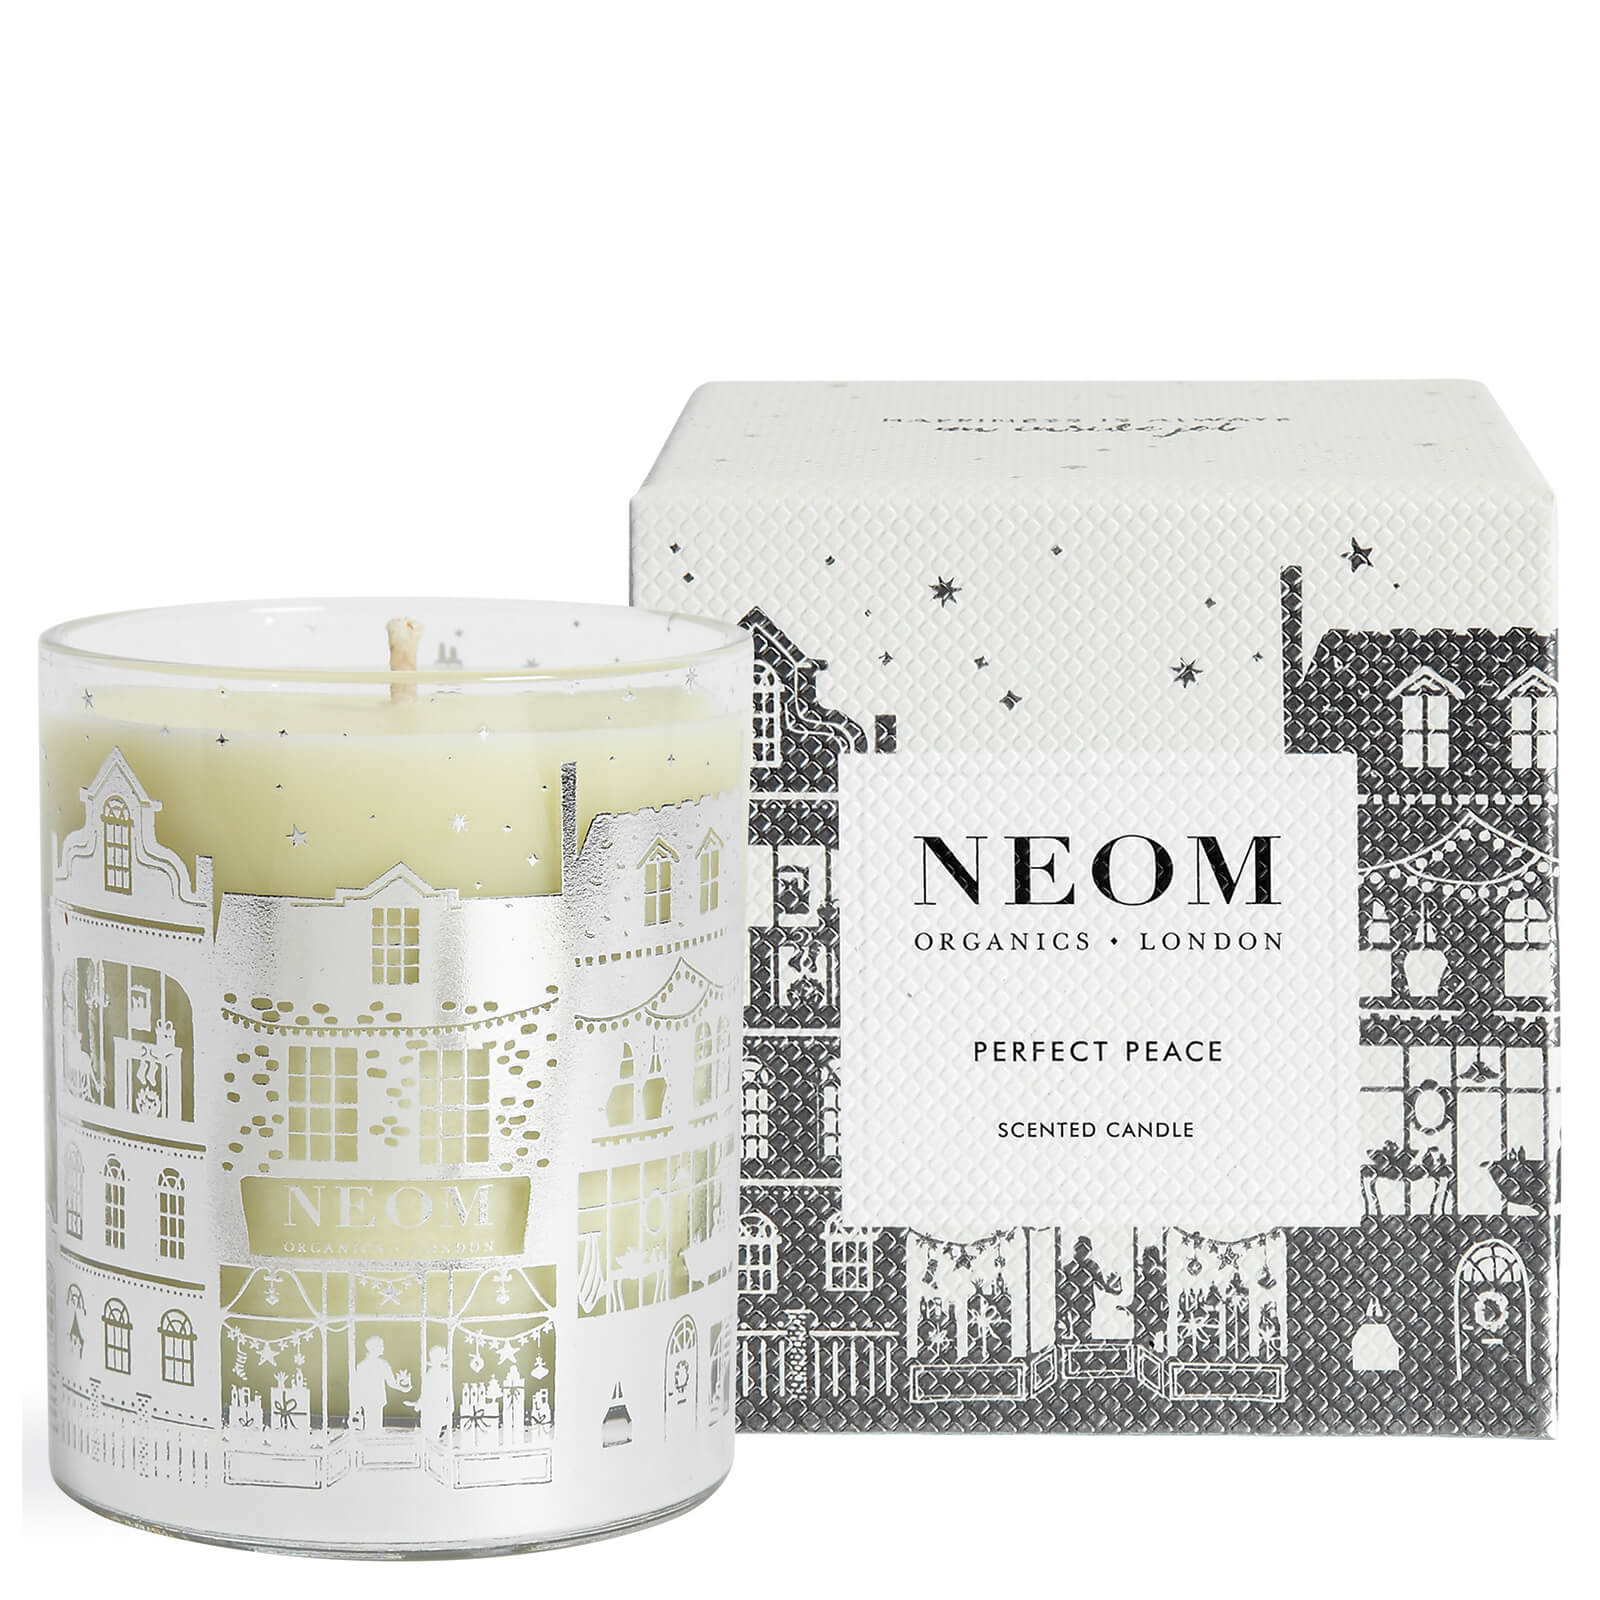 Neom Organics London Perfect Peace Scented Candle (1 Wick)